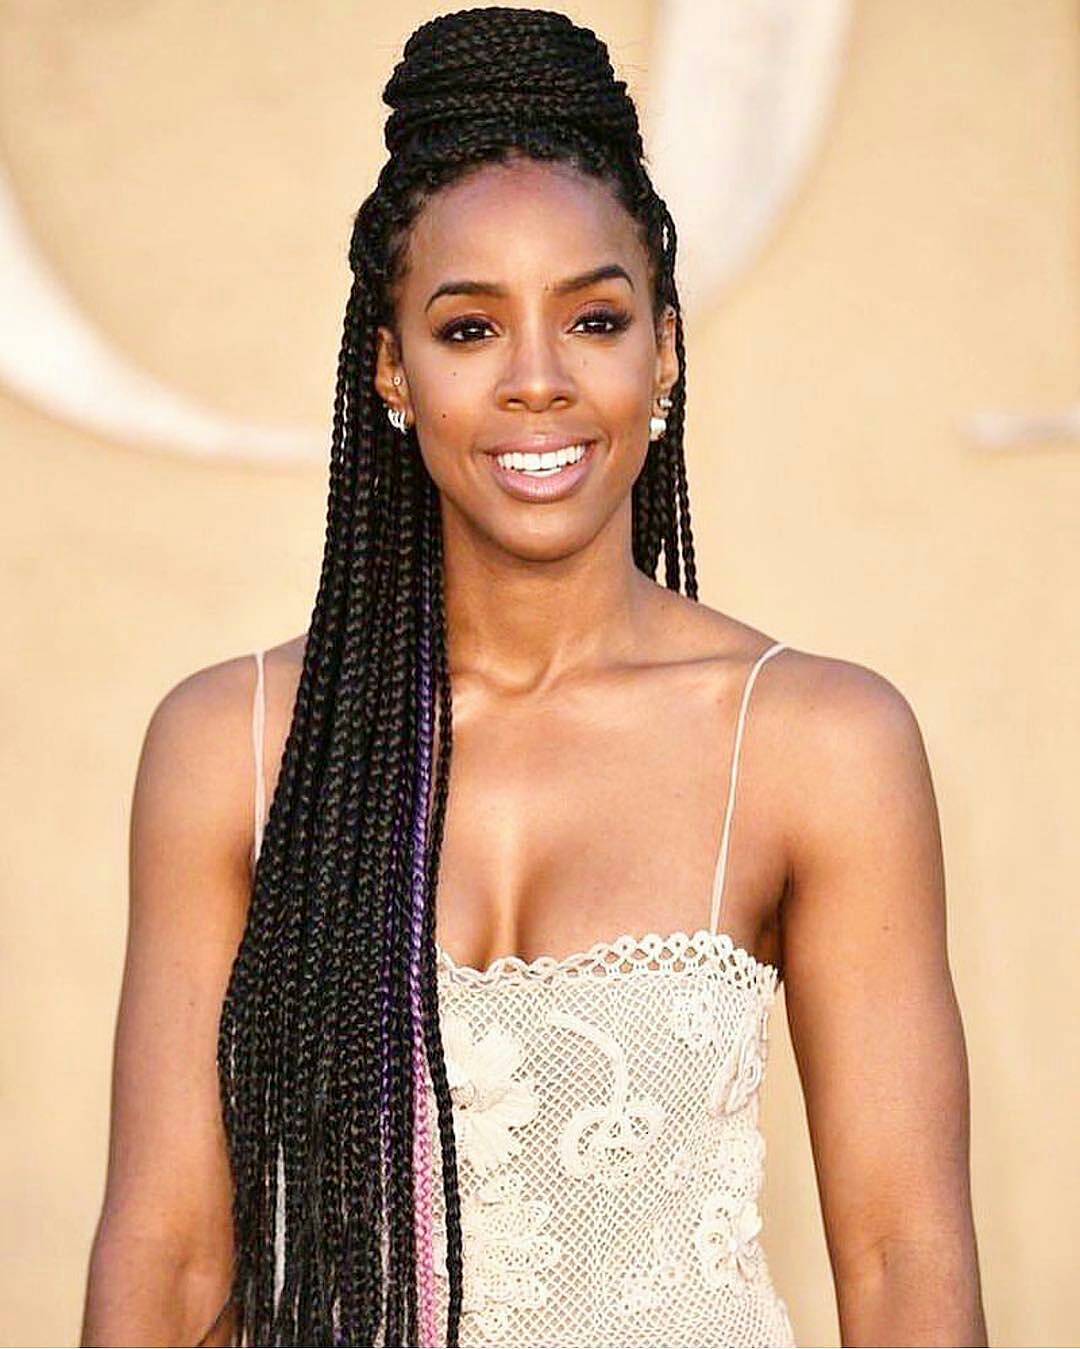 All You Can Do with Waist-length braids